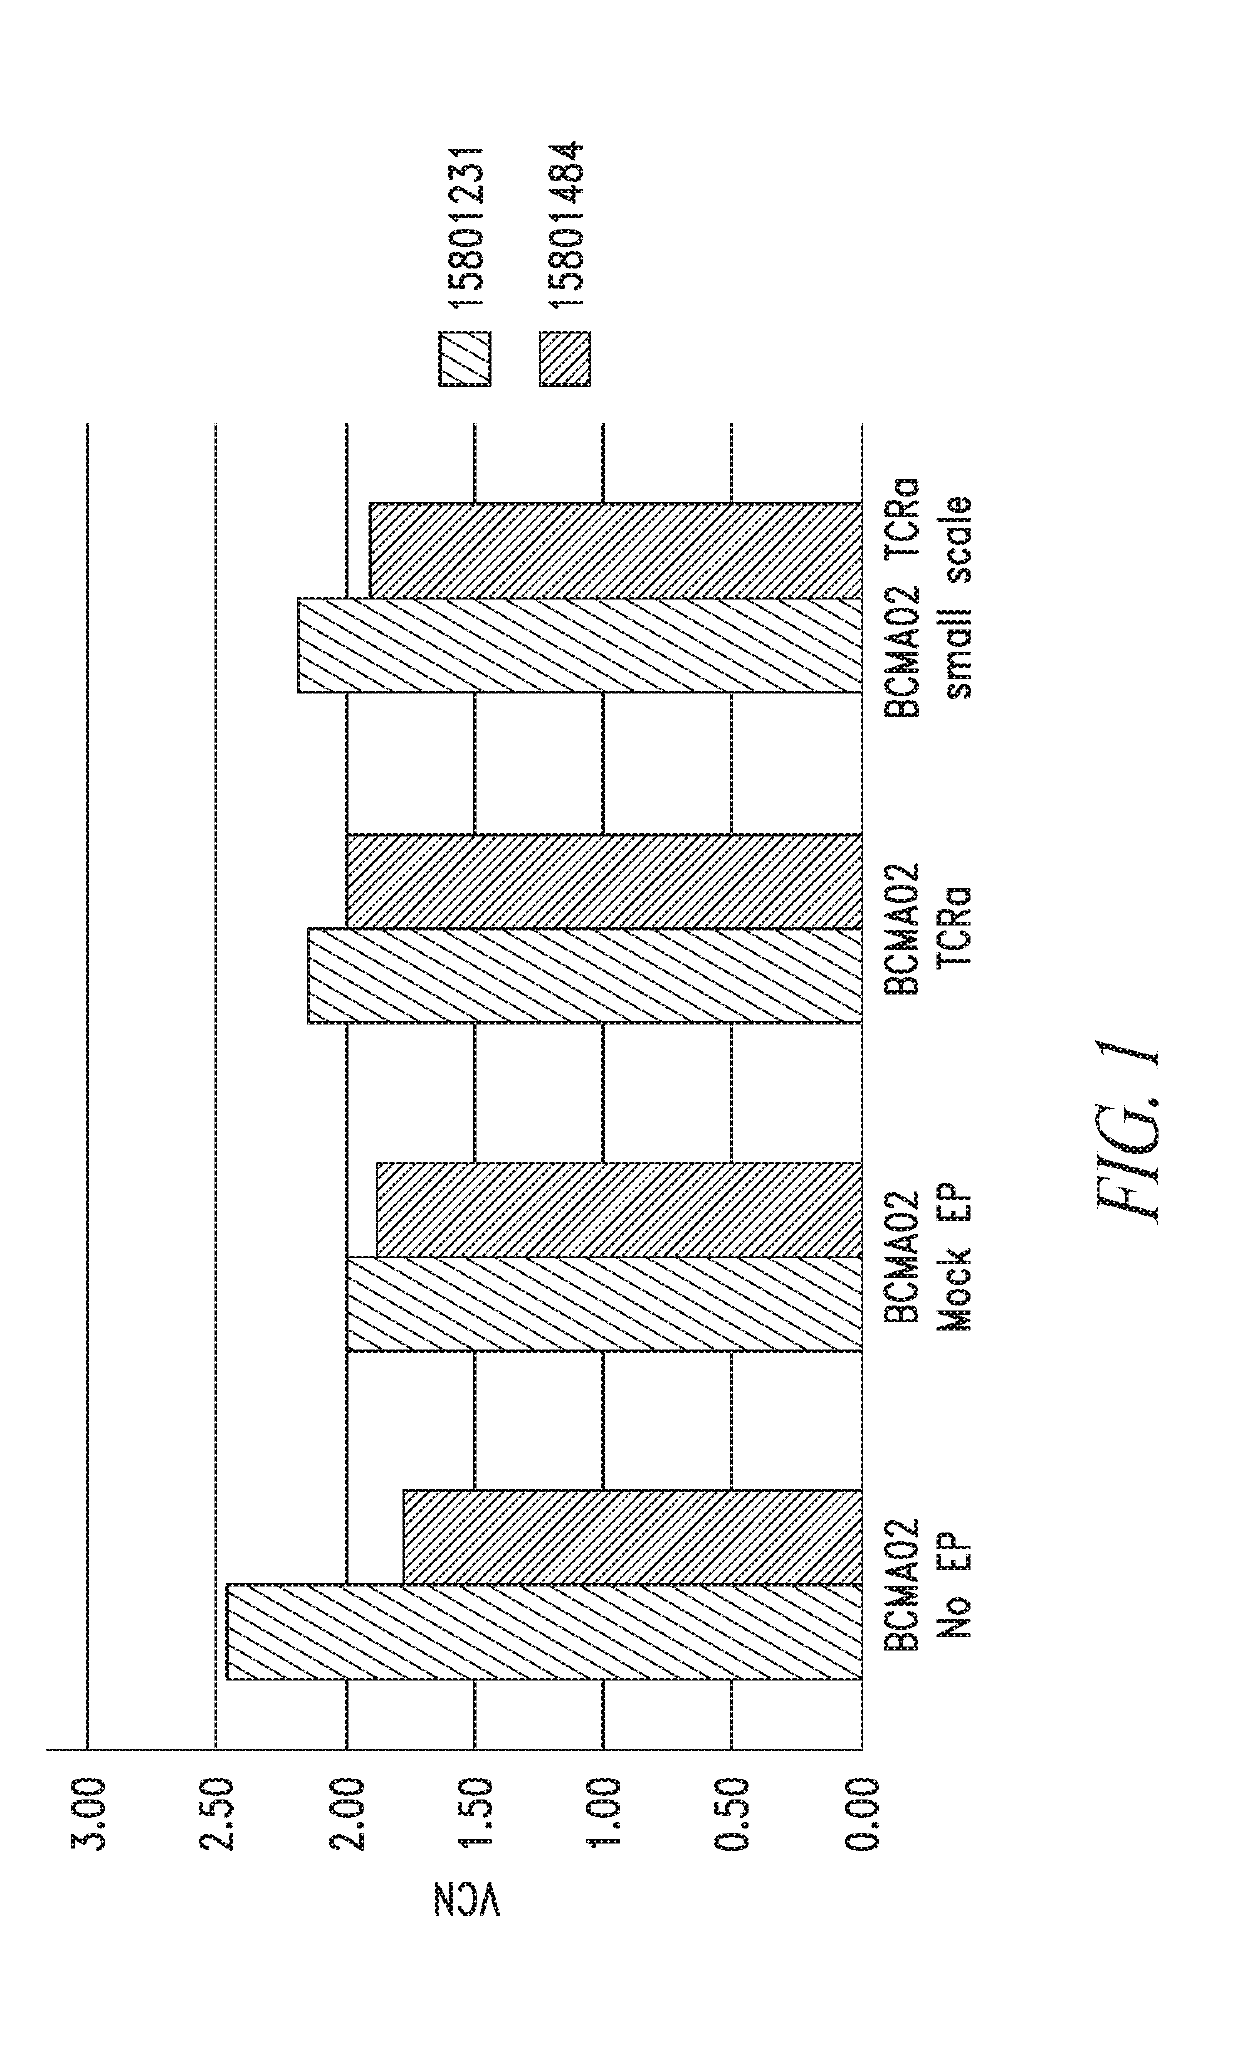 Chimeric antigen receptor t cell compositions